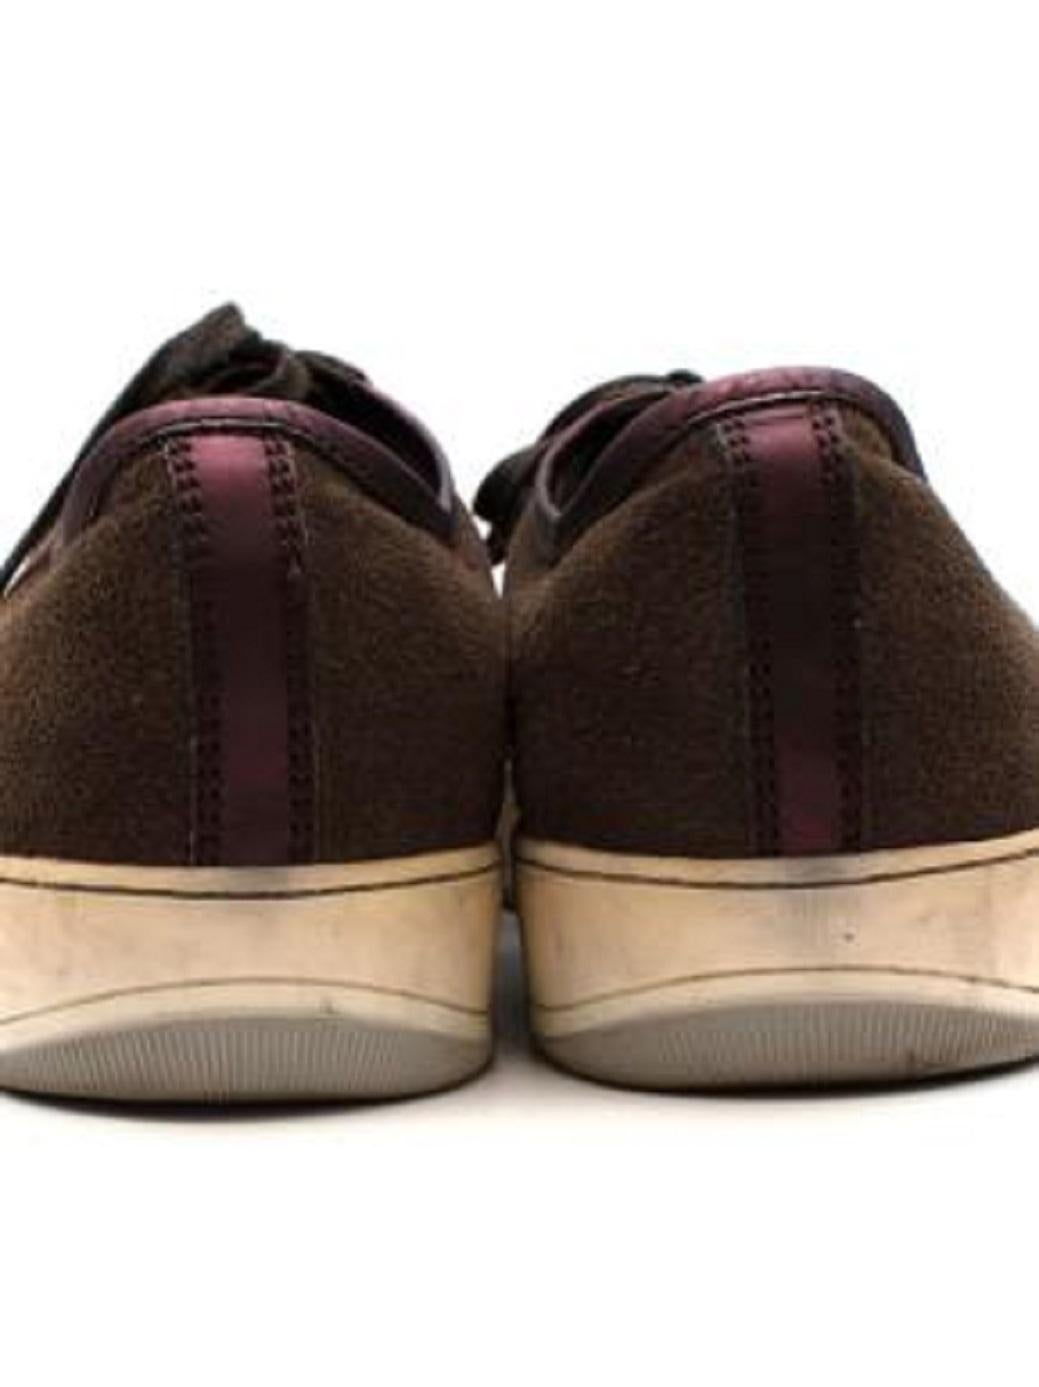 Lanvin Brown Suede Cap-Toe Lace-Up Sneakers In Good Condition For Sale In London, GB